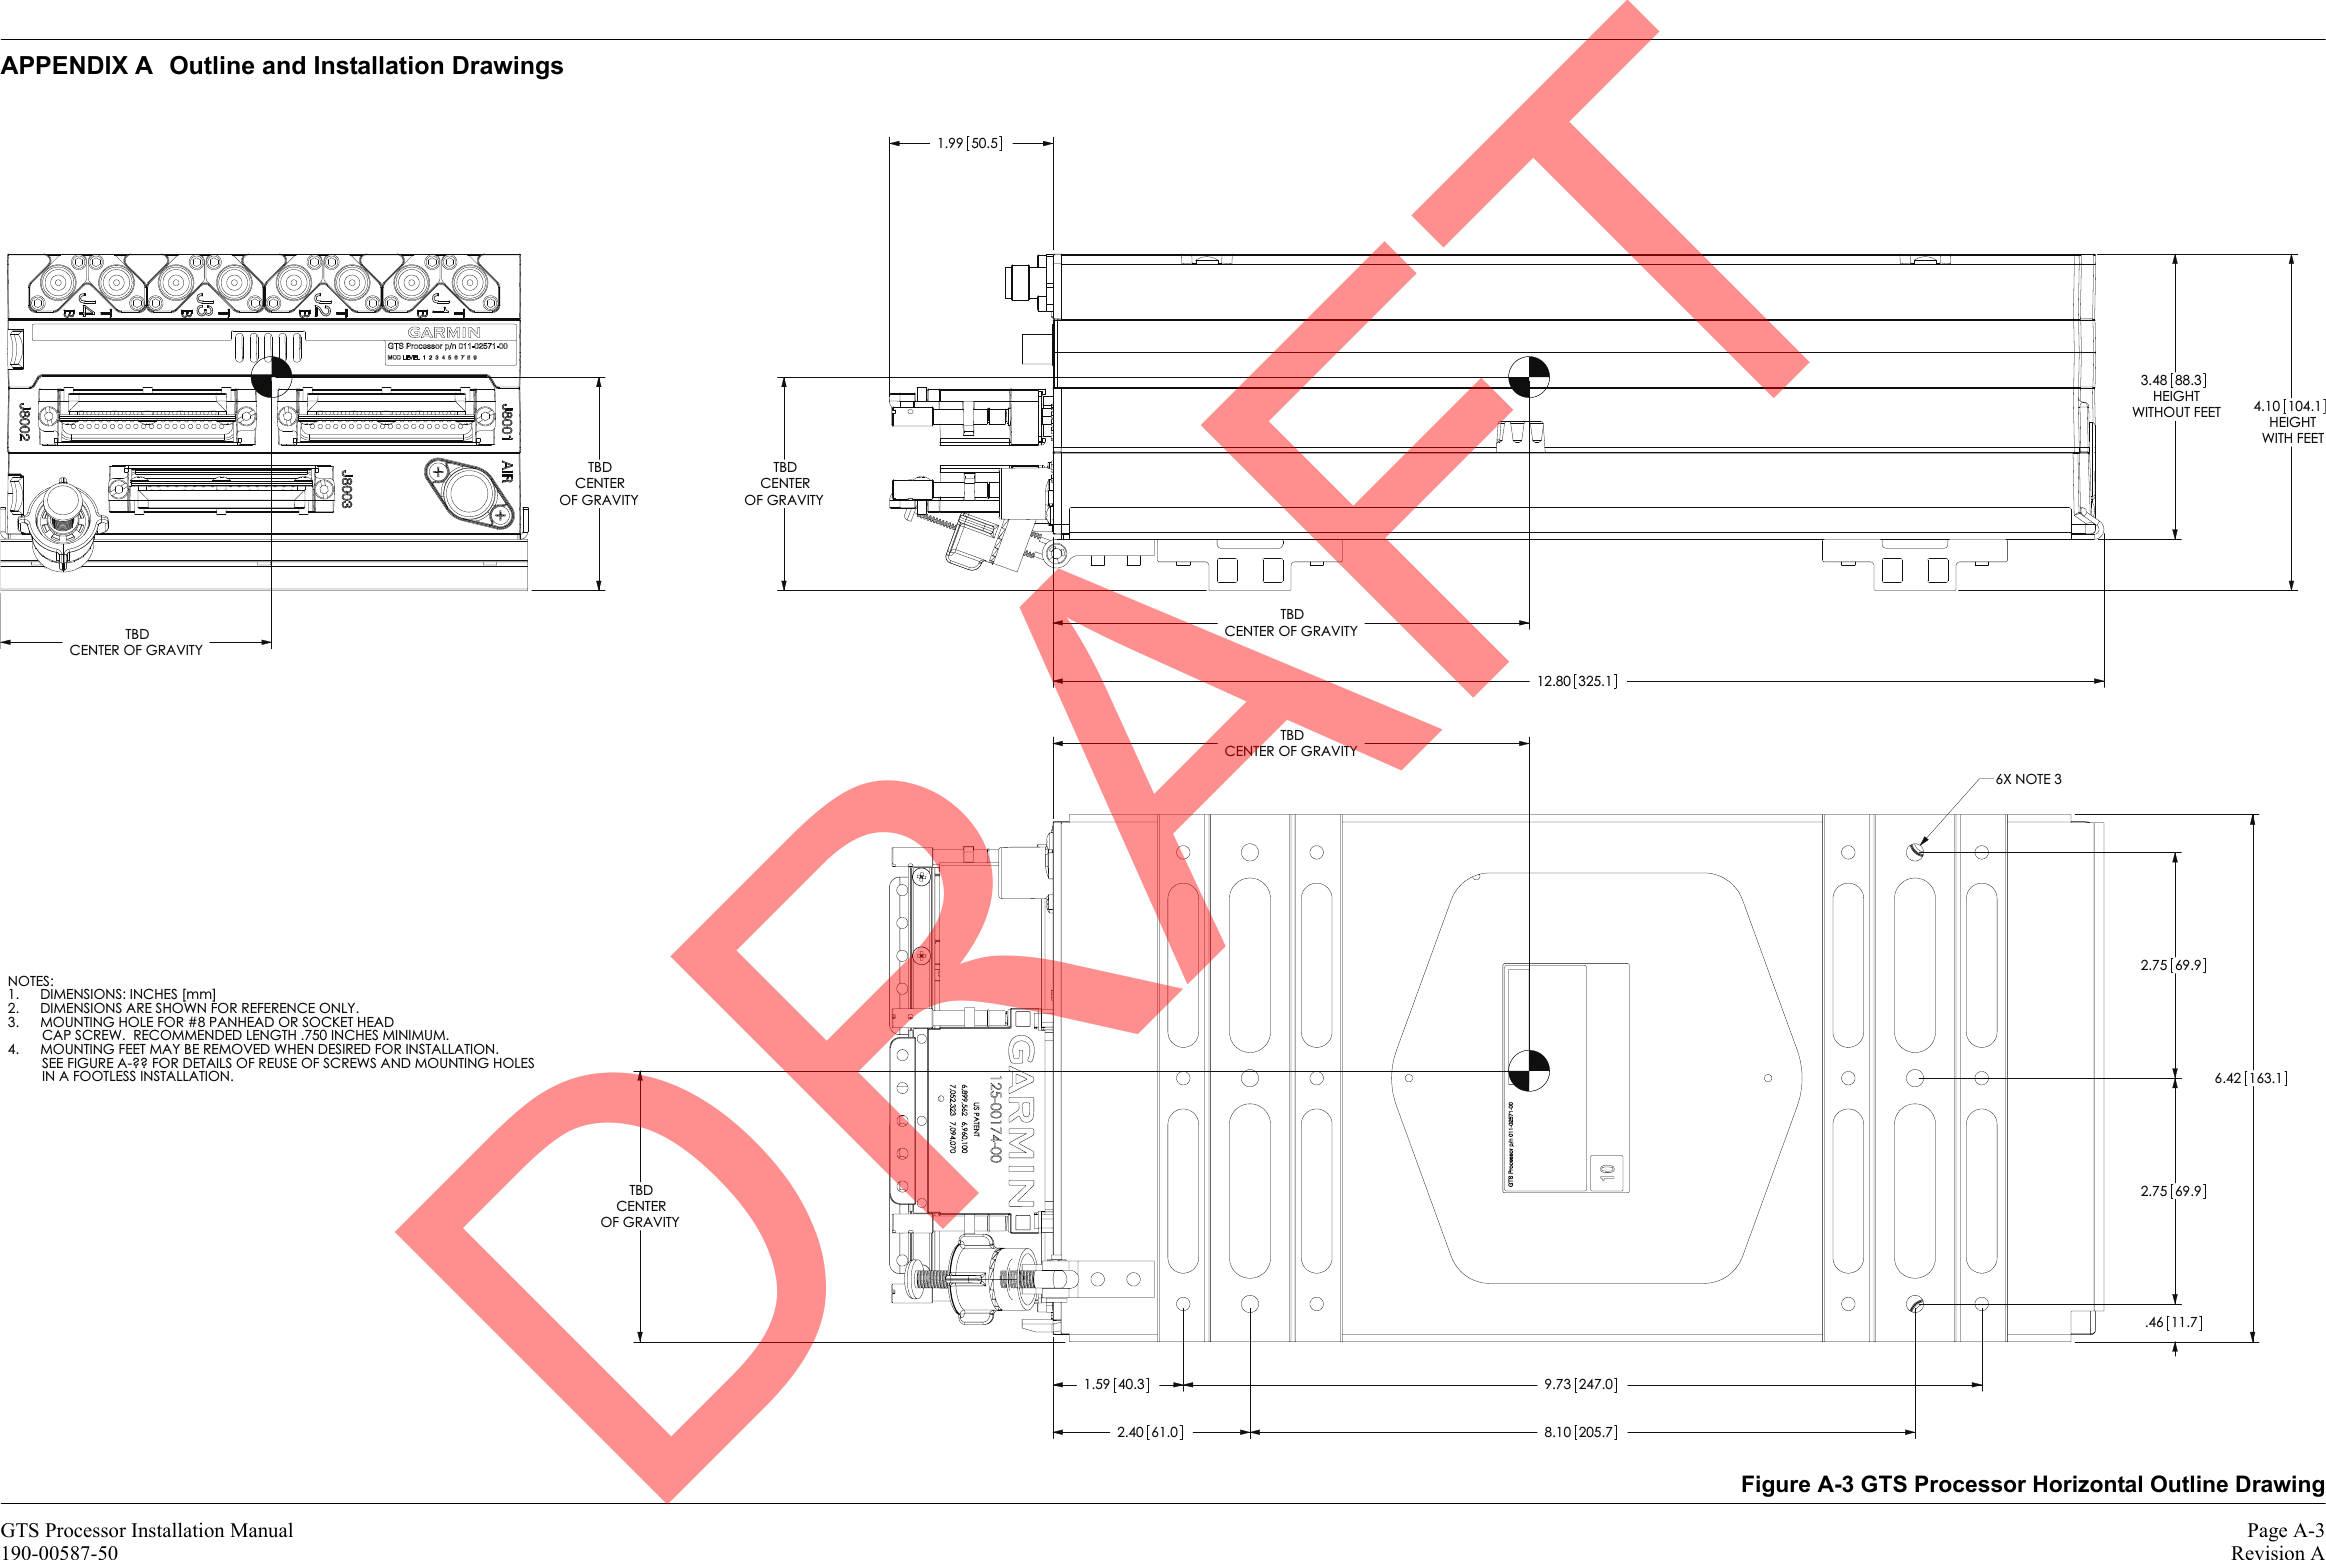 GTS Processor Installation Manual Page A-3190-00587-50 Revision AAPPENDIX A Outline and Installation DrawingsFigure A-3 GTS Processor Horizontal Outline Drawing1.99 50.53.48 88.3HEIGHTWITHOUT FEET4.10104.1HEIGHTWITH FEET12.80 325.1CENTER OF GRAVITYTBDOF GRAVITYTBDCENTEROF GRAVITYTBDCENTERCENTER OF GRAVITYTBD1.59 40.3 9.73247.02.40 61.0 8.10205.7.4611.72.75 69.92.75 69.96.42163.1OF GRAVITYTBDCENTERCENTER OF GRAVITYTBD6X NOTE 3NOTES:DIMENSIONS: INCHES [mm]1.DIMENSIONS ARE SHOWN FOR REFERENCE ONLY.2.MOUNTING HOLE FOR #8 PANHEAD OR SOCKET HEAD3.         CAP SCREW.  RECOMMENDED LENGTH .750 INCHES MINIMUM.MOUNTING FEET MAY BE REMOVED WHEN DESIRED FOR INSTALLATION.4.         SEE FIGURE A-?? FOR DETAILS OF REUSE OF SCREWS AND MOUNTING HOLES         IN A FOOTLESS INSTALLATION.DRAFT